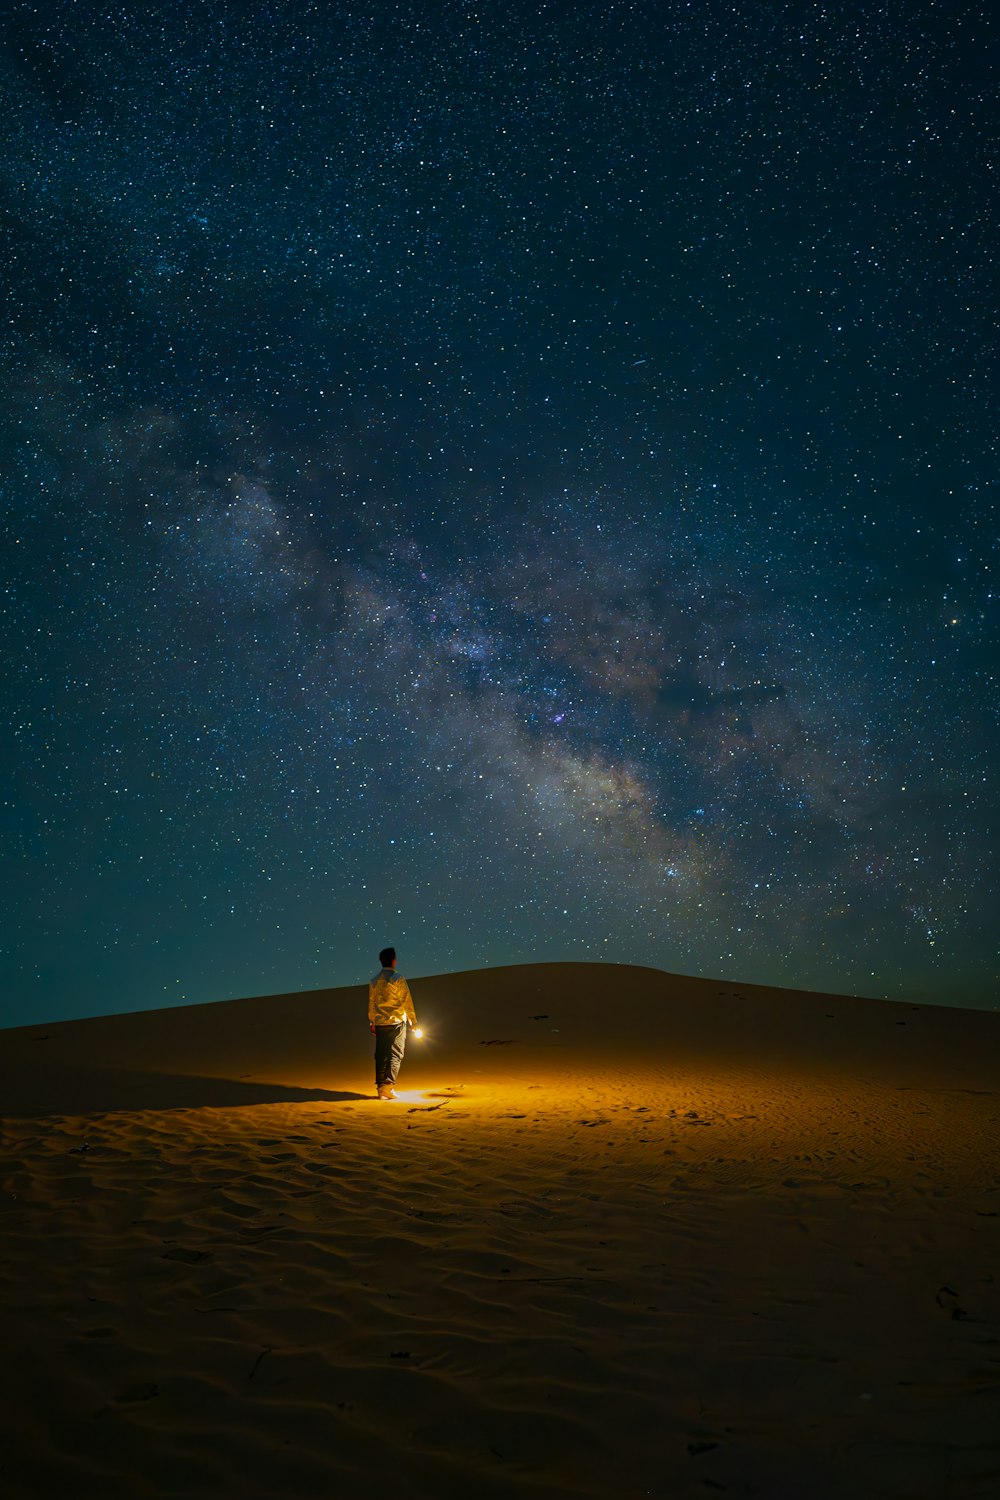 a man standing on top of a sandy hill under a night sky filled with stars